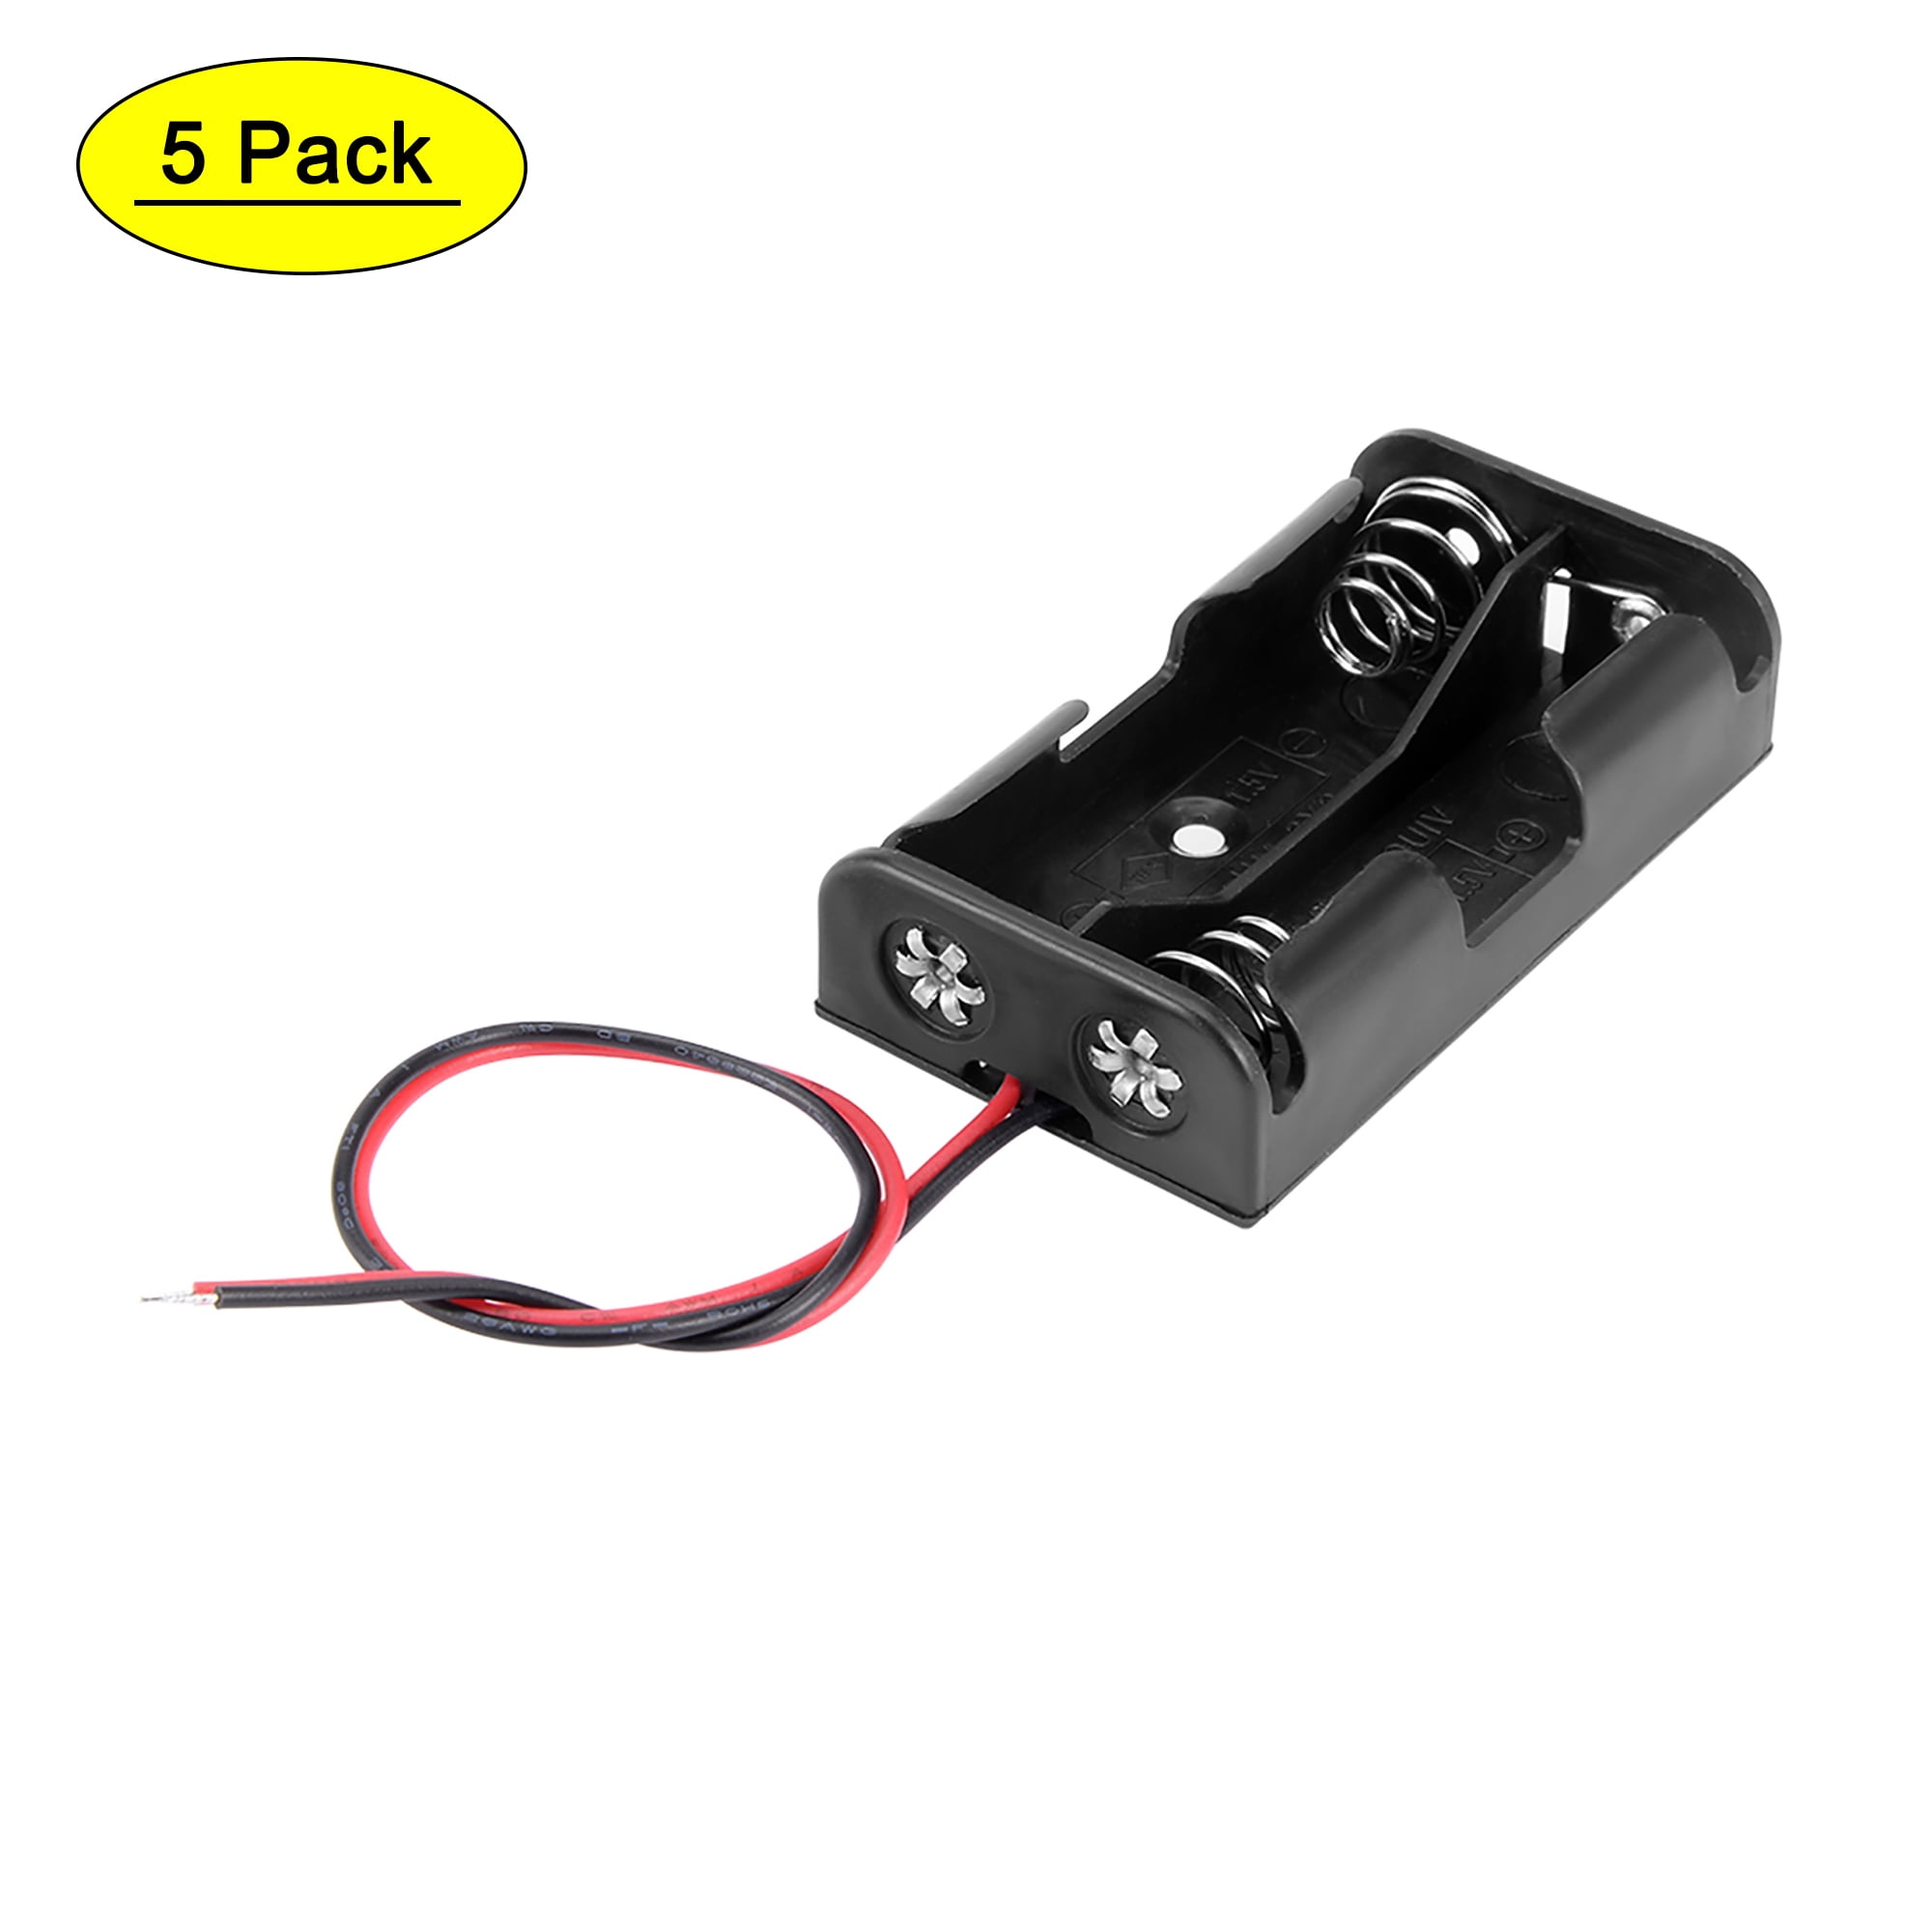 10Pcs Plastic Battery Storage Case Box Holder with wire leads For 1 X AA 